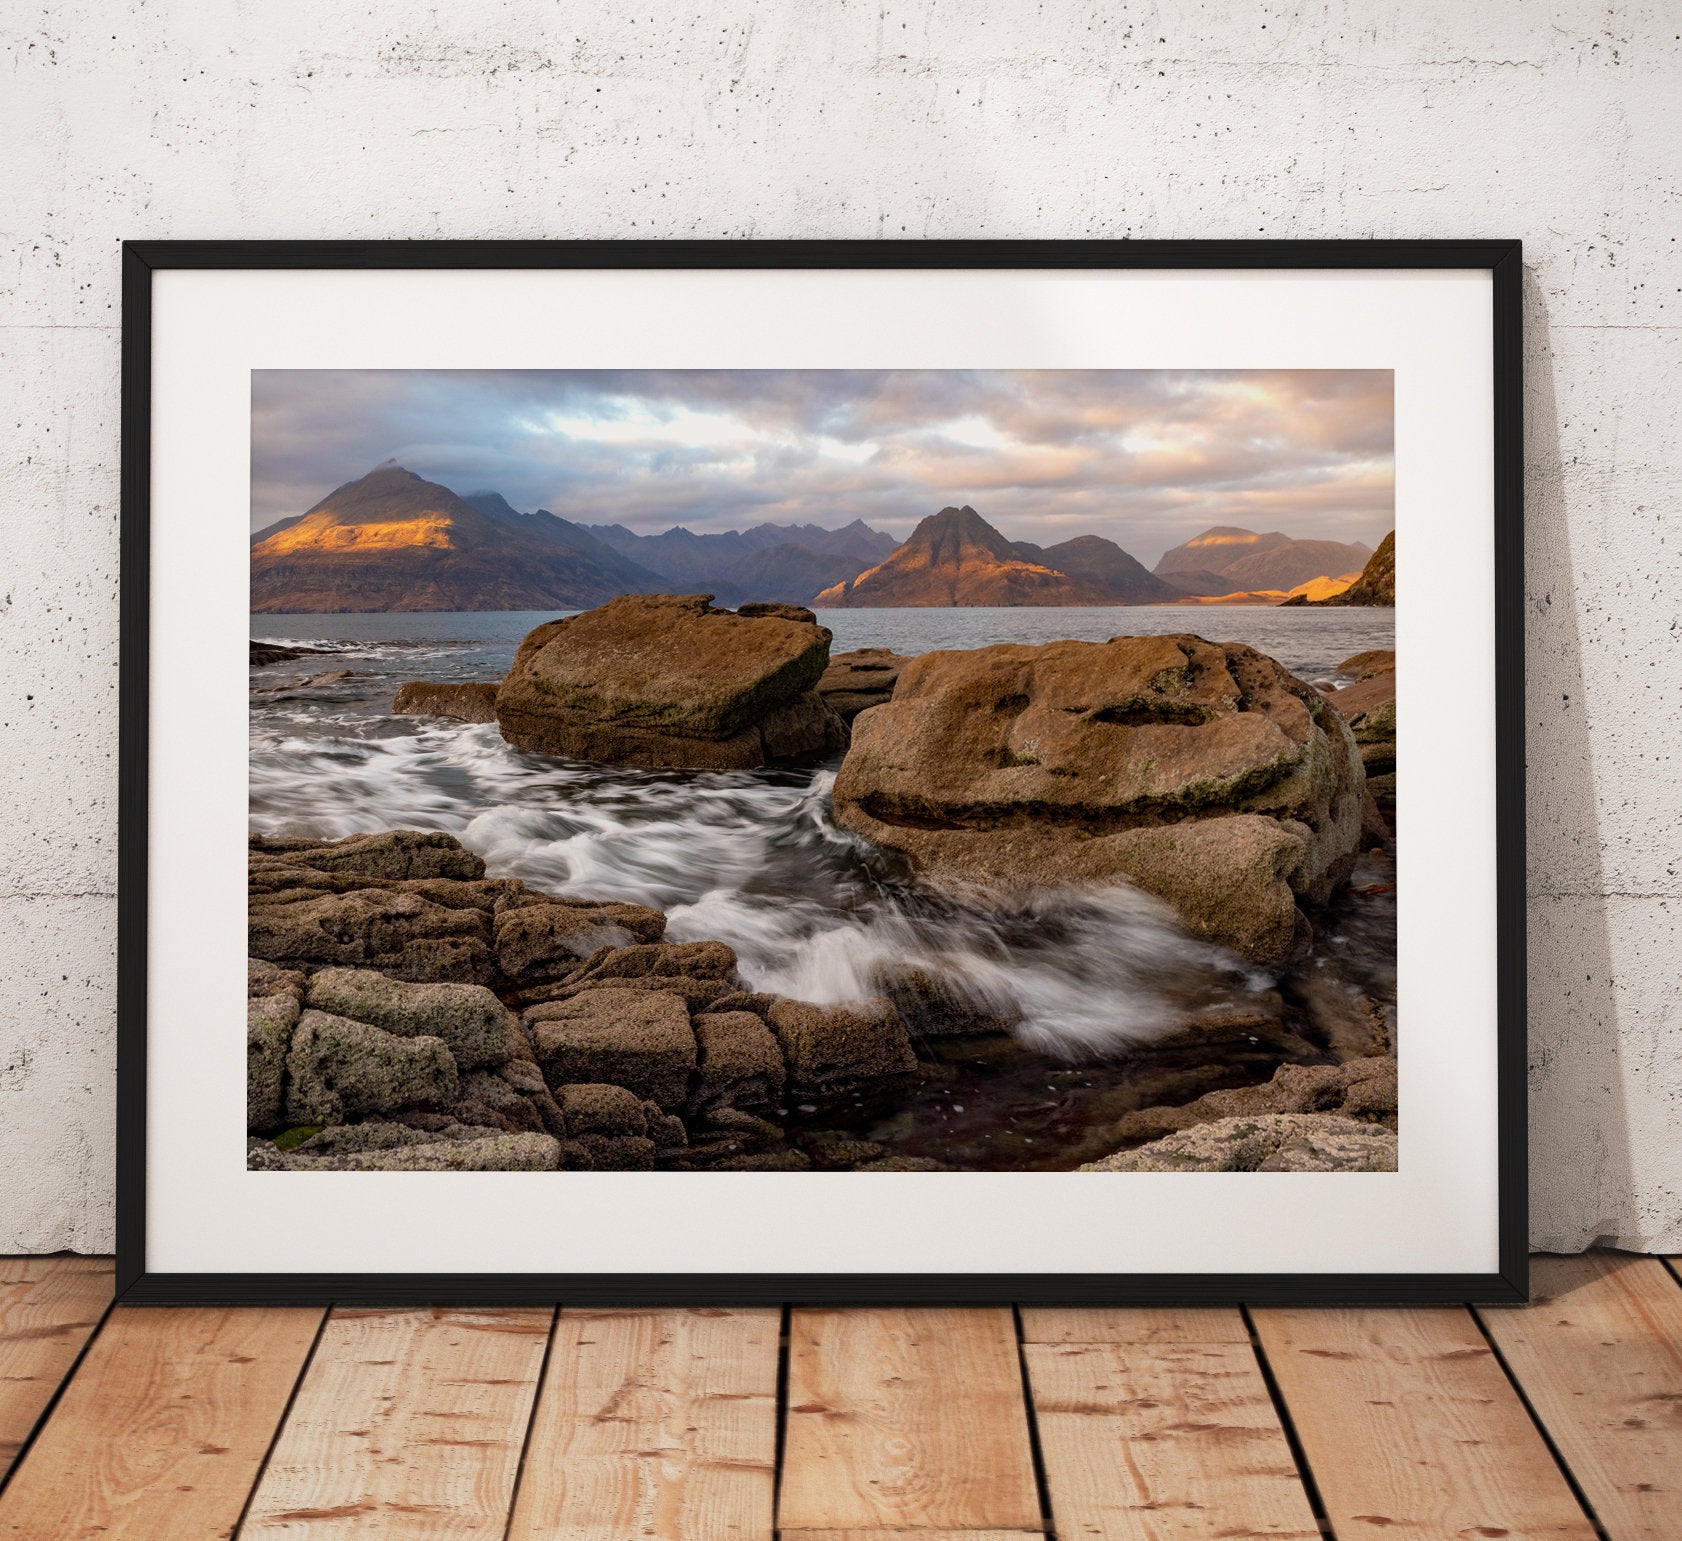 A happy Landscape Photograph taken at the village of Elgol on the Isle of Skye in the Scottish Highlands, UK